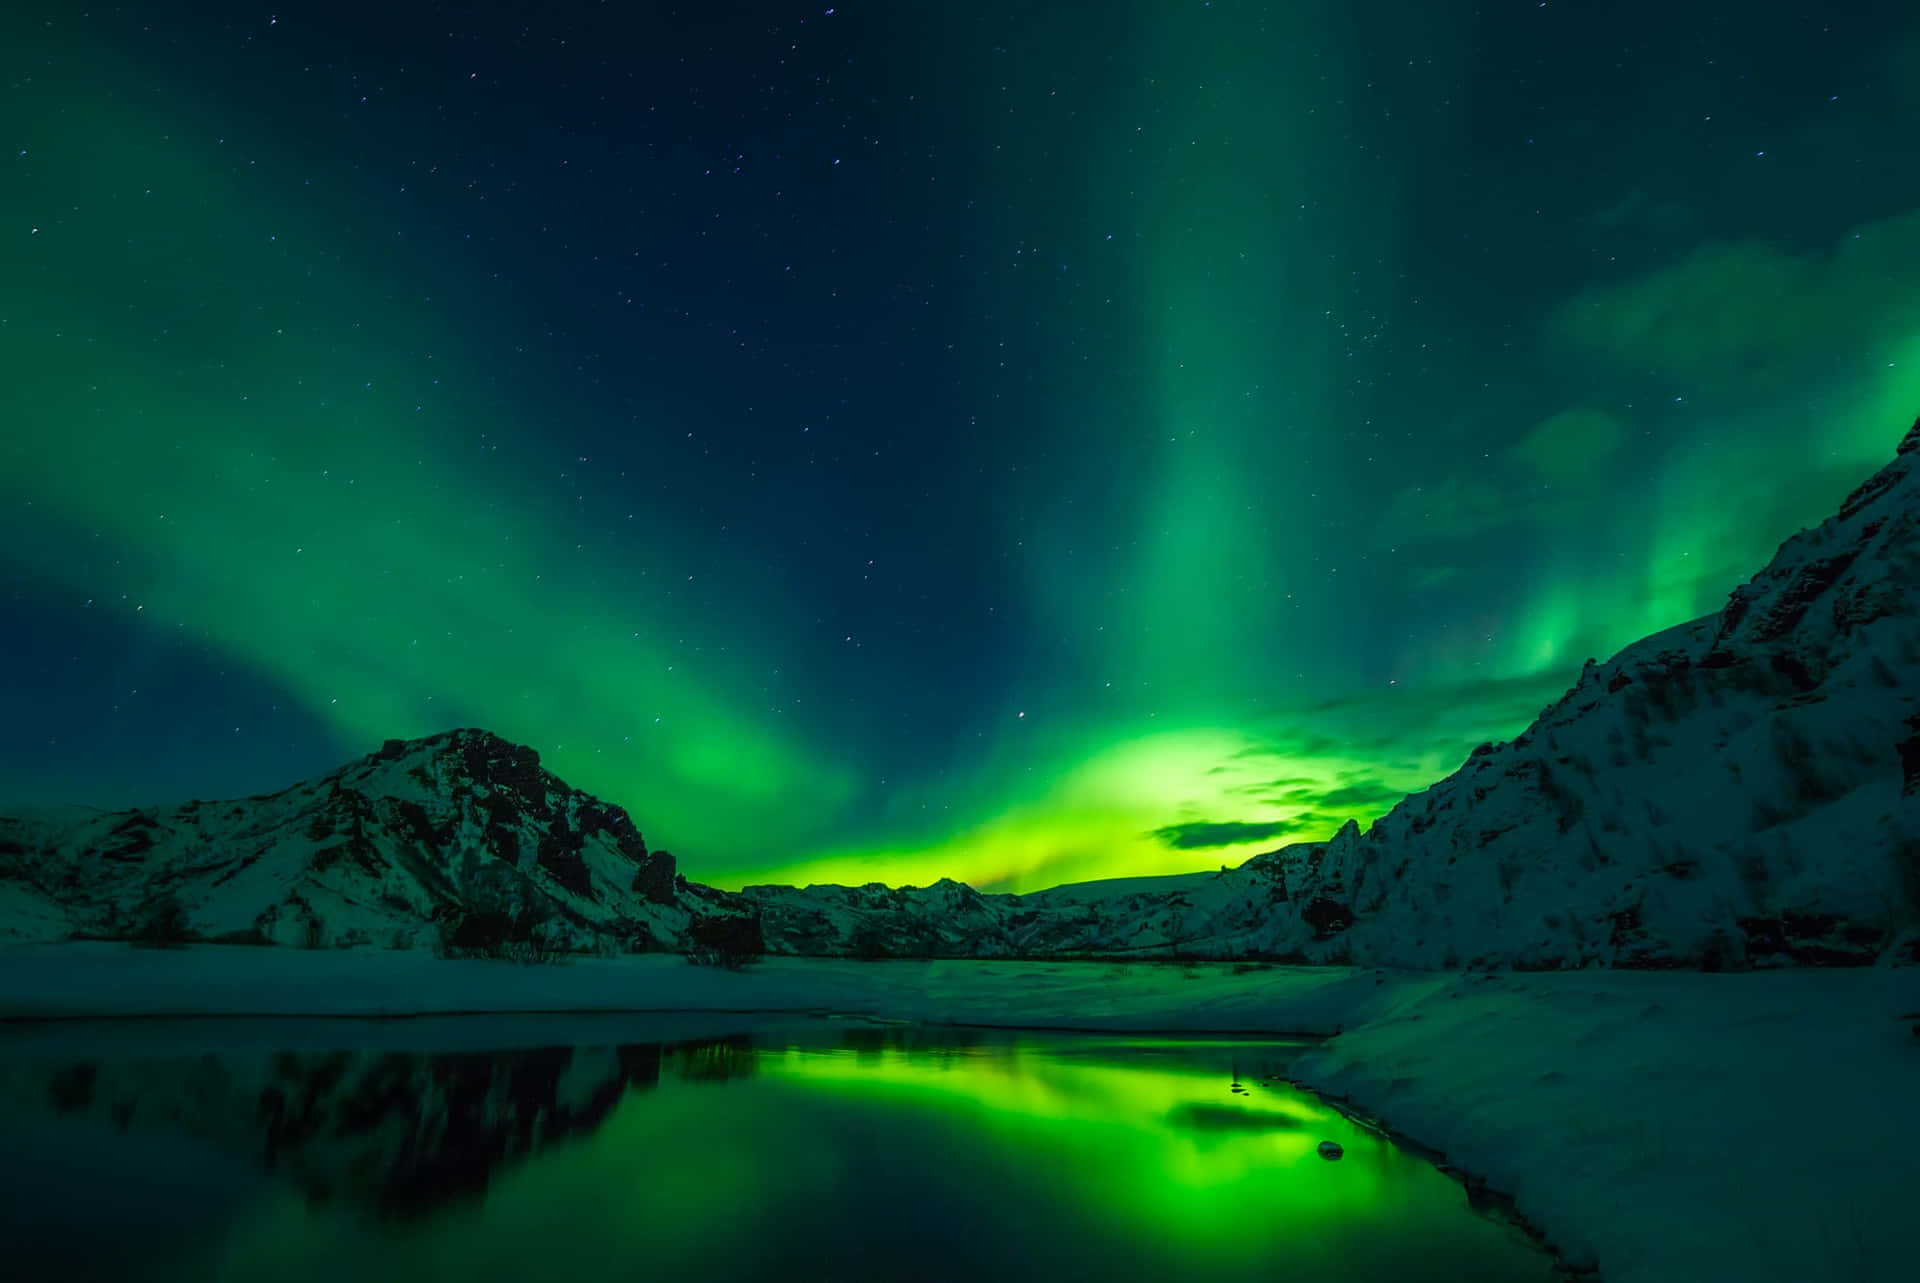 An illuminating display of vibrant colors from the magical Northern Lights